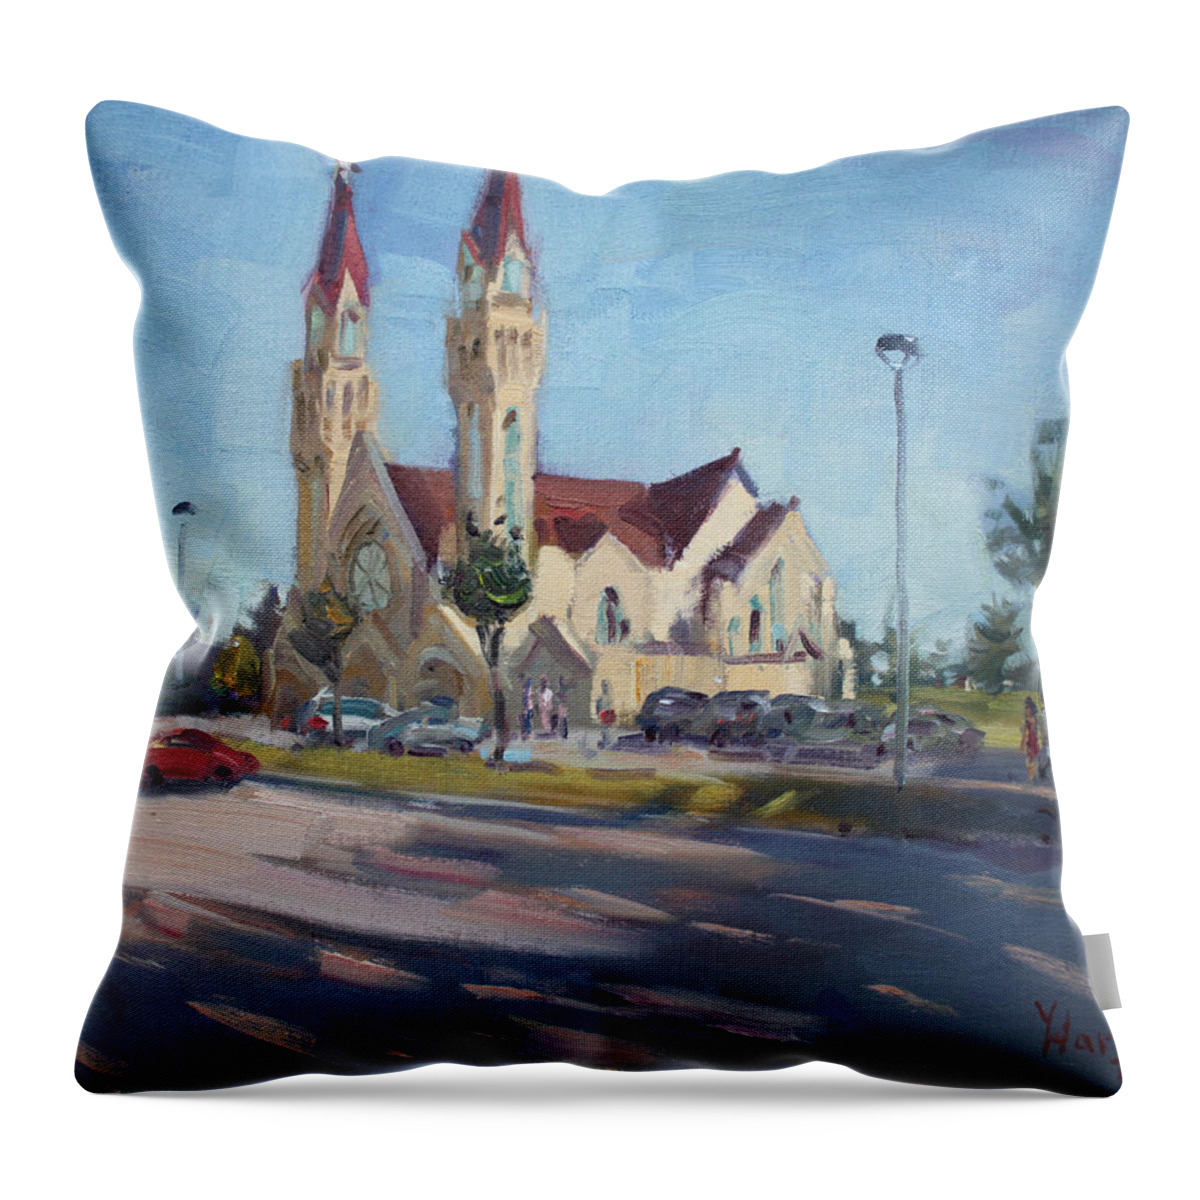 Croatian Centre Throw Pillow featuring the painting Croatian Centre-The Queen Of Peace by Ylli Haruni